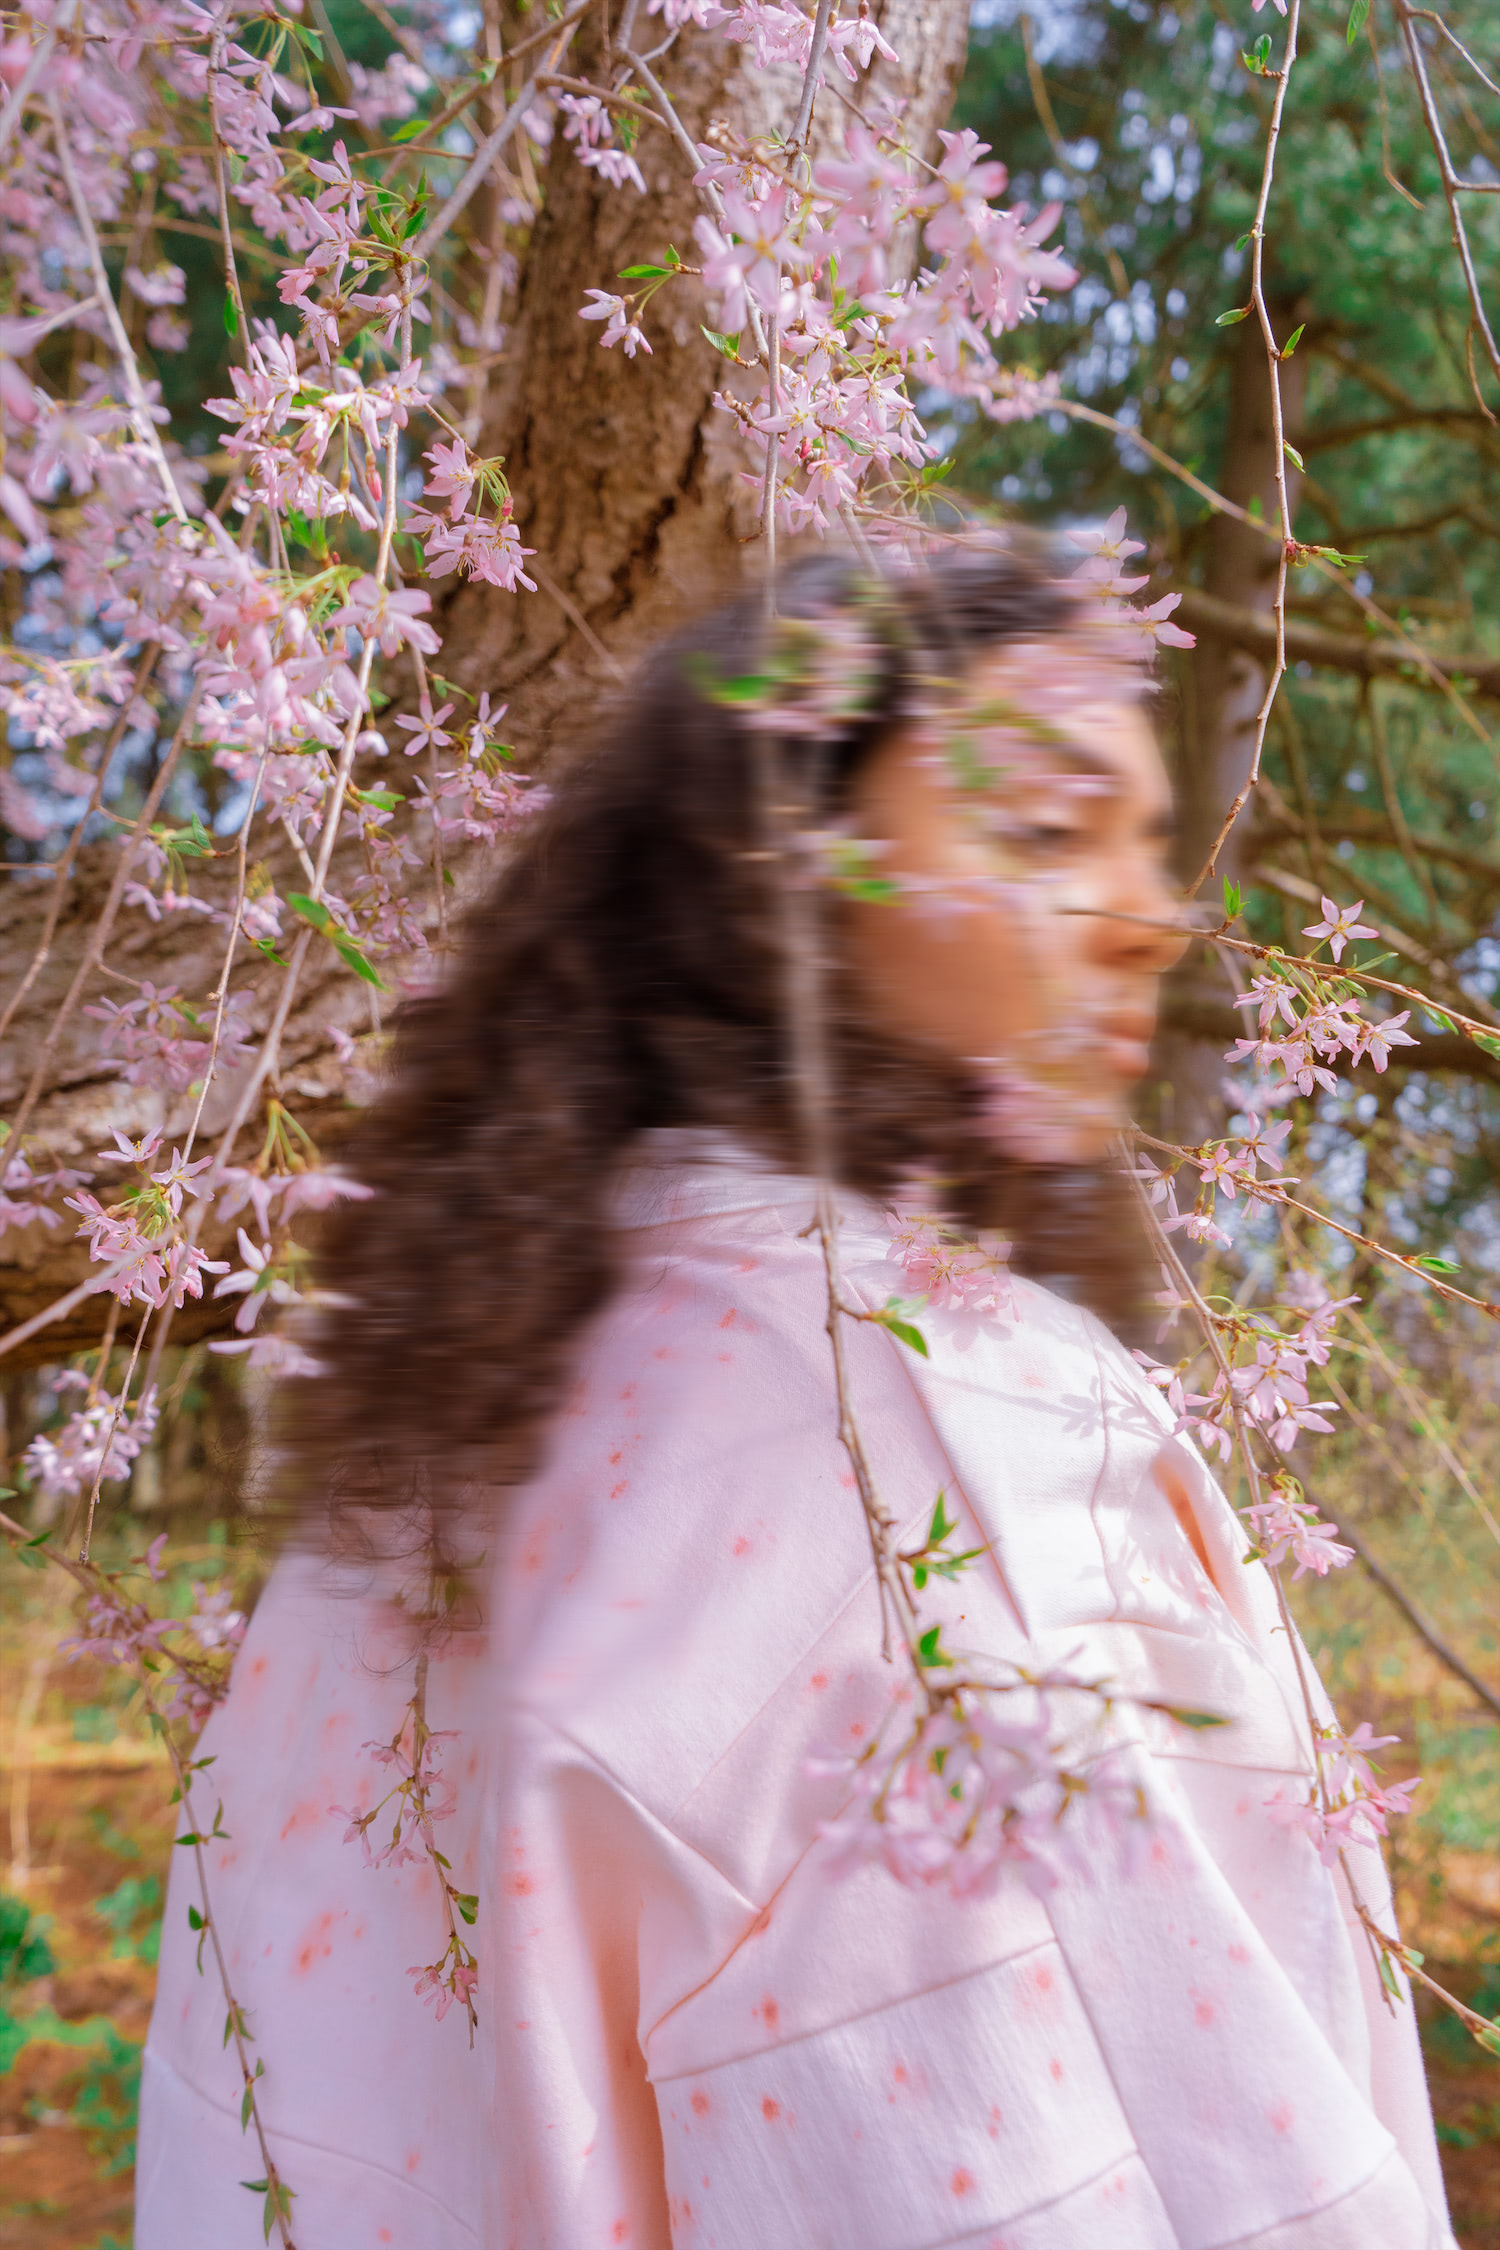 Model wearing acne jacket, up close, facing back, under blossoming tree